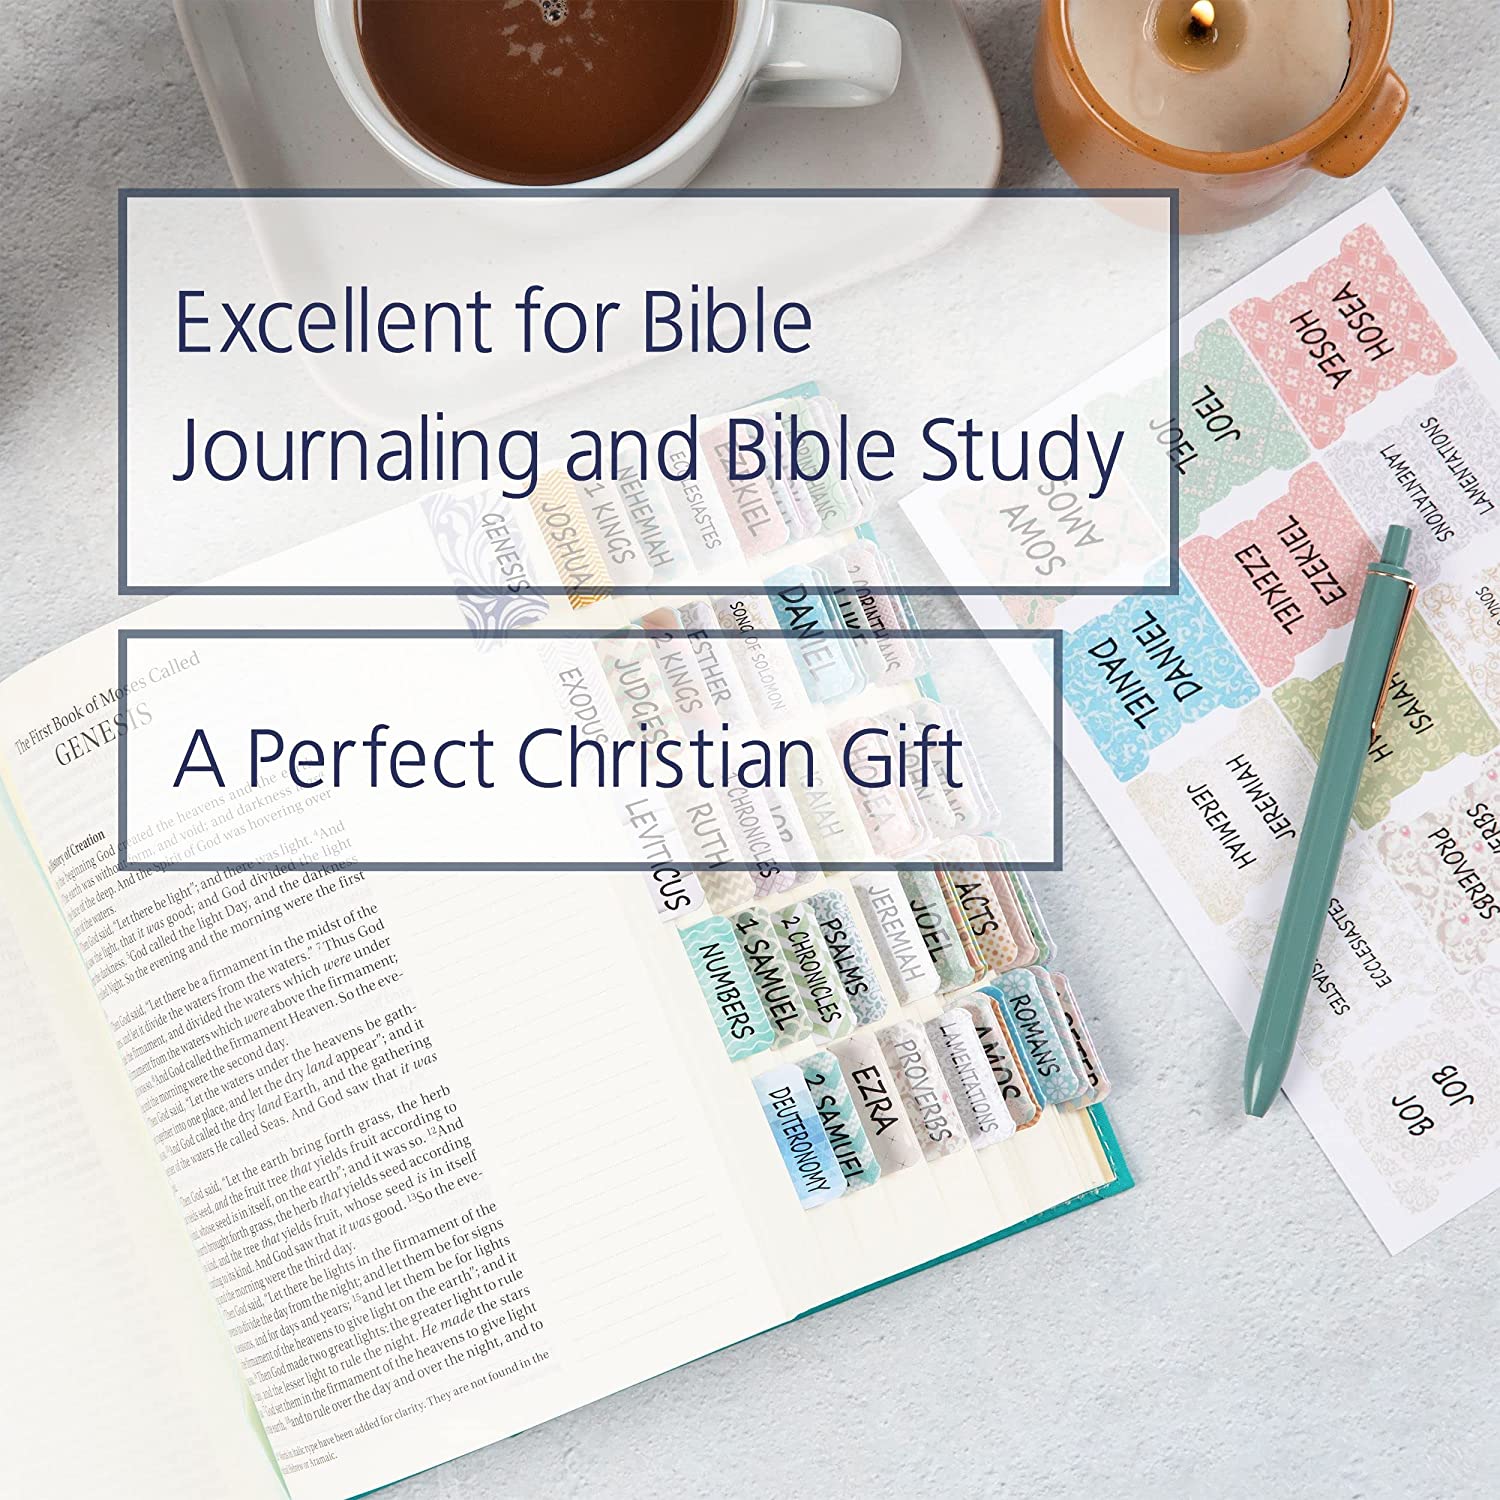 Bible Tabs, Bible StickyIndex 75 Tabs, Laminated, Bible Journaling  Supplies, Bible Tabs Old And New Testament, Bible Tabs For Women, Bible  Tabs For Jo